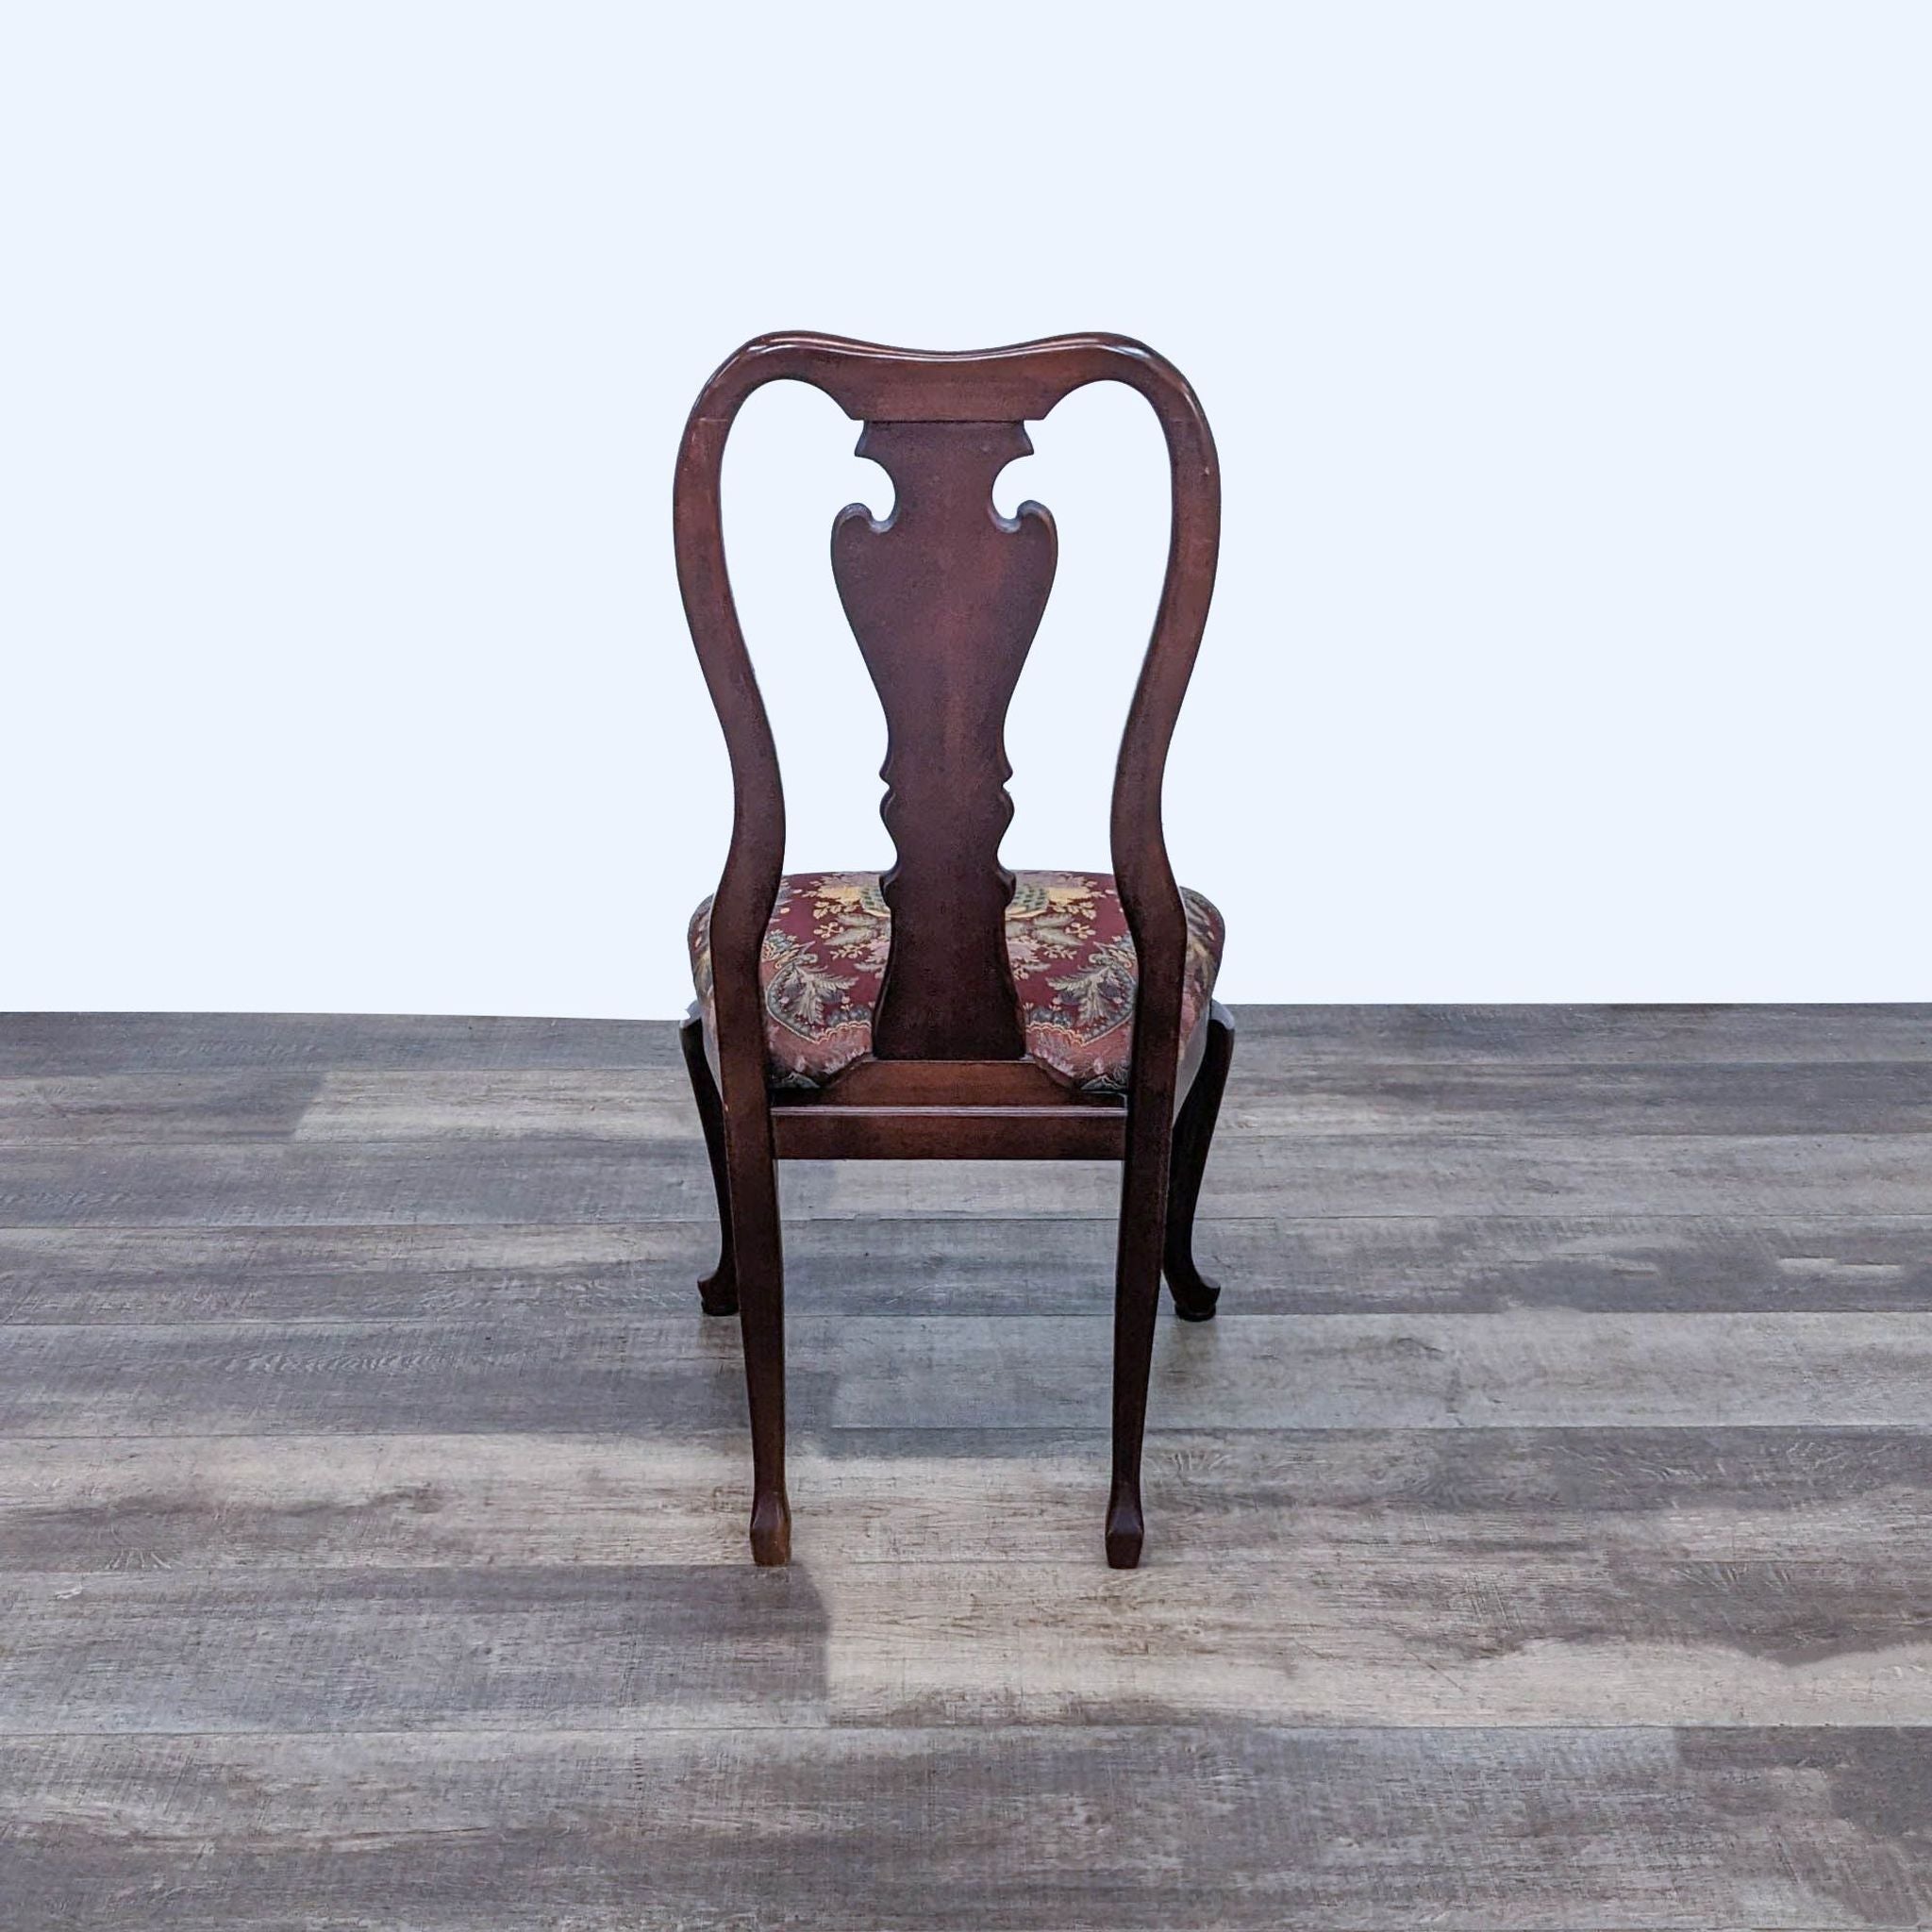 Ethan Allen dining chair with dark wood finish and floral patterned upholstery on a wooden floor.